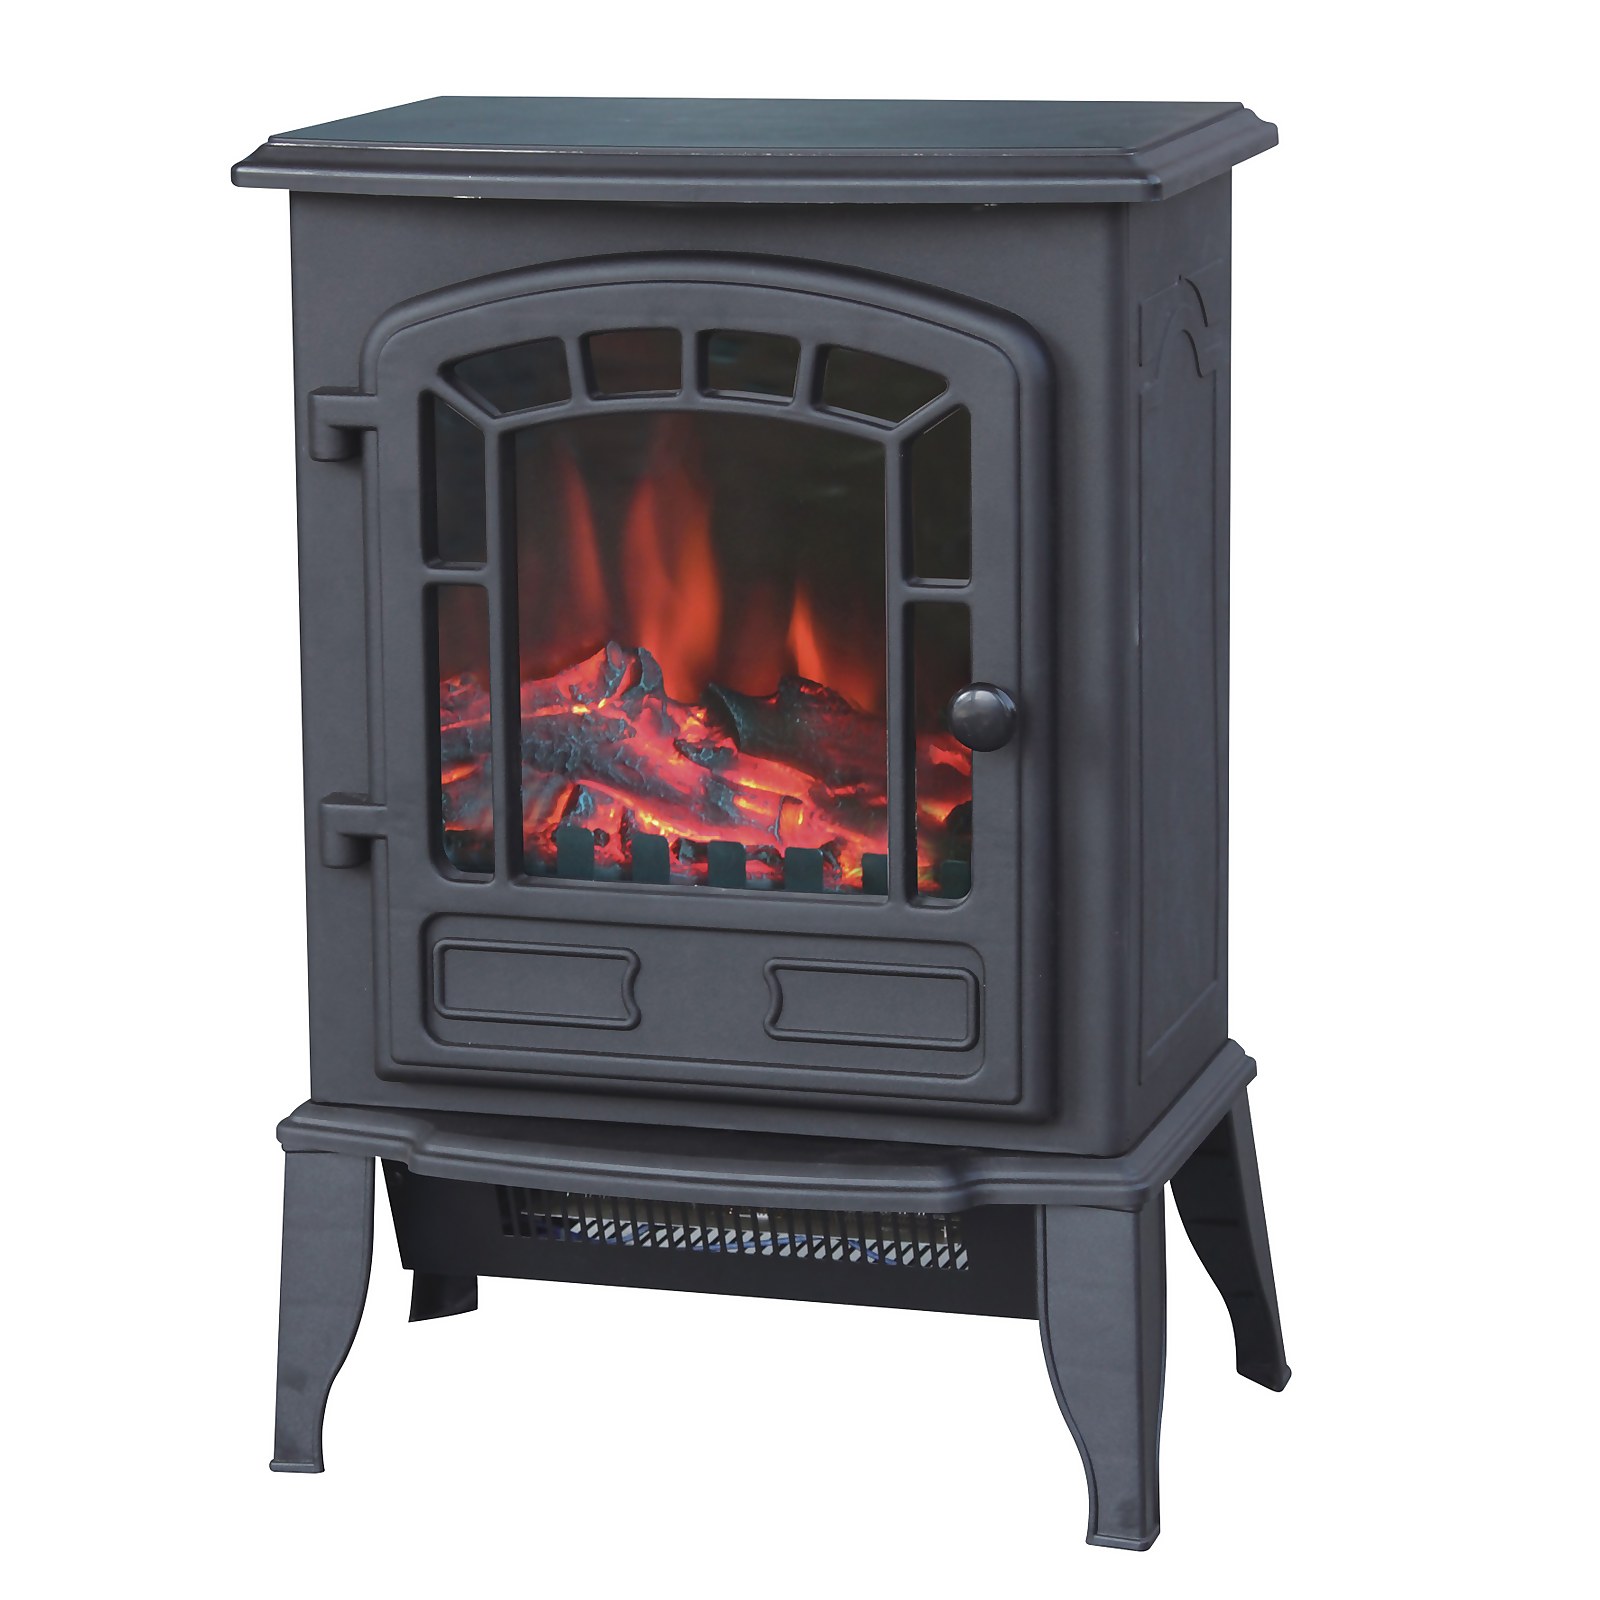 Stylec Freestanding Electric Stove with Realistic Flame Effect - Black